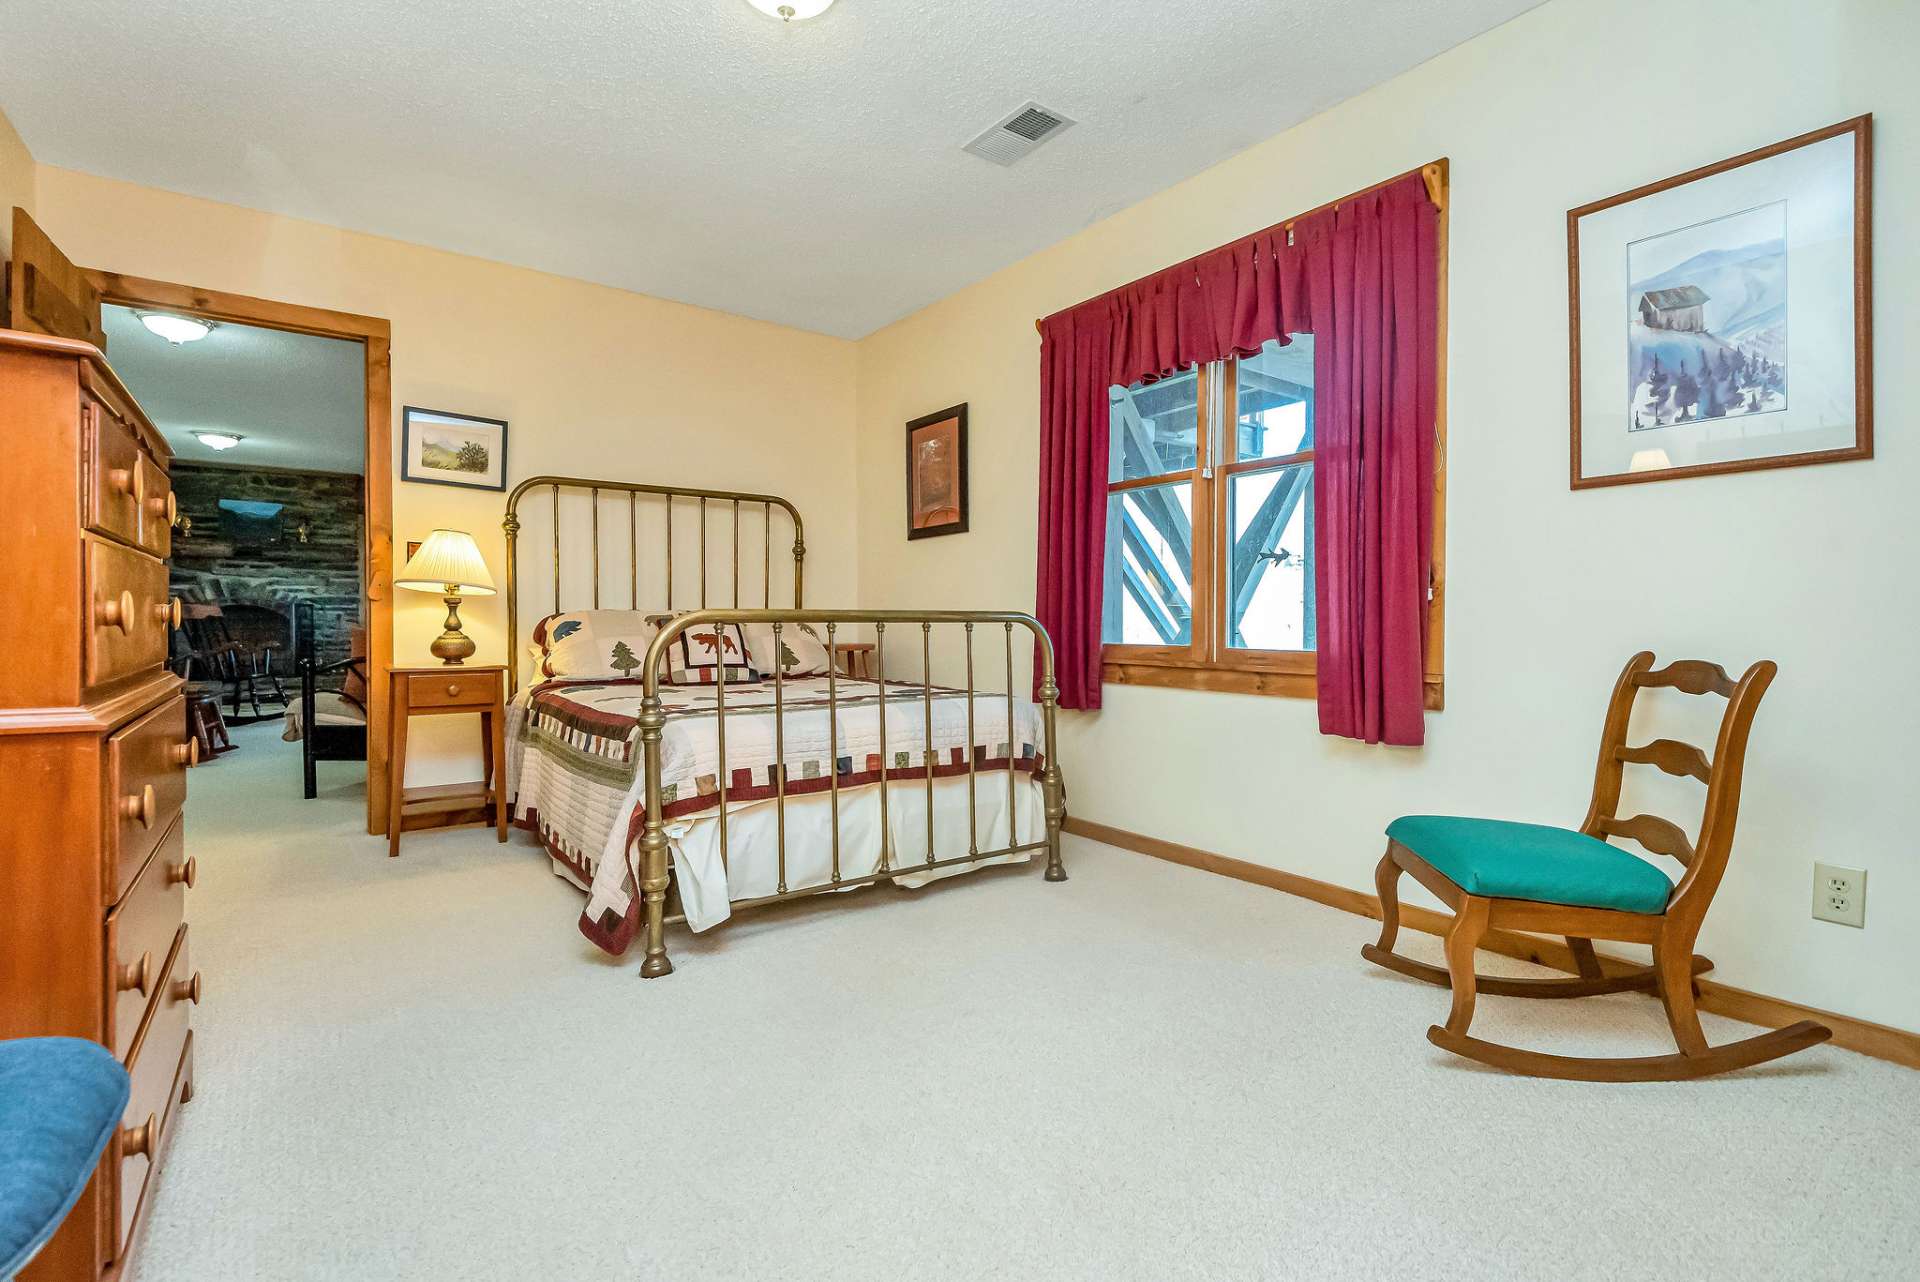 This well-appointed bedroom with a full bath and convenient laundry facilities round out the lower level.